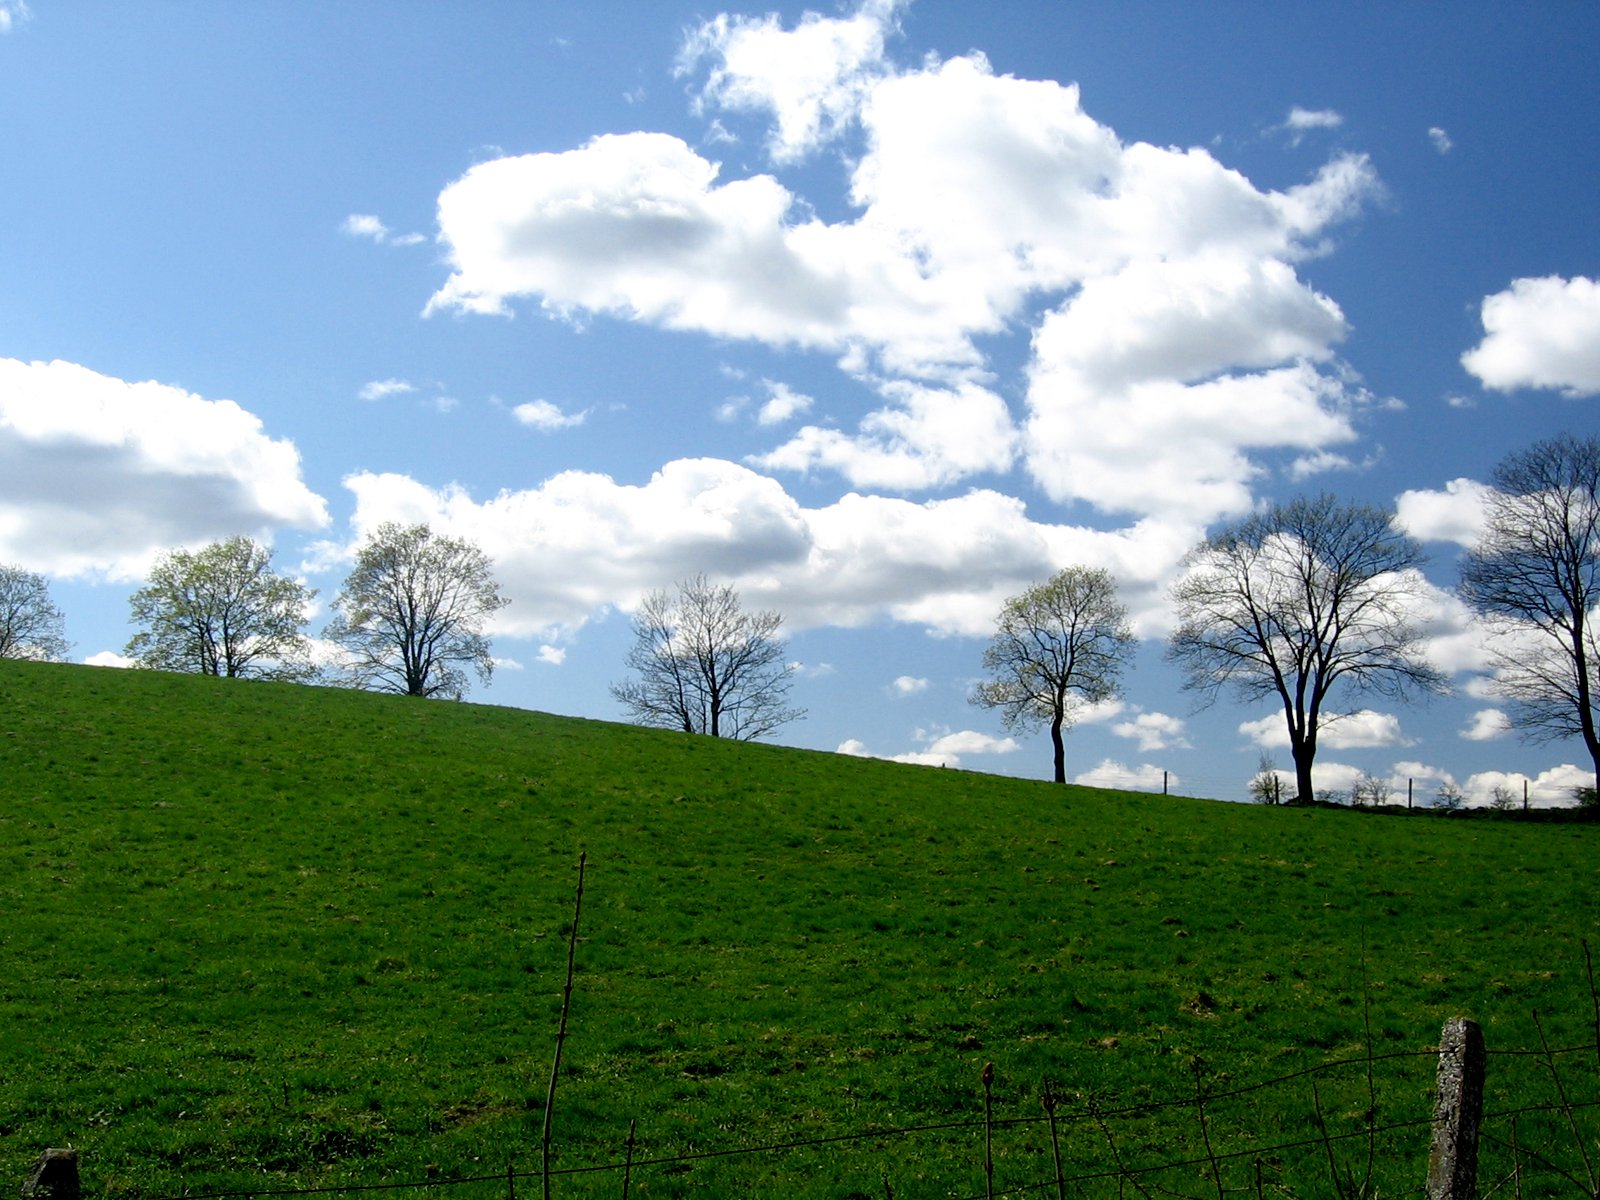 several trees on the side of a hill in the middle of nowhere